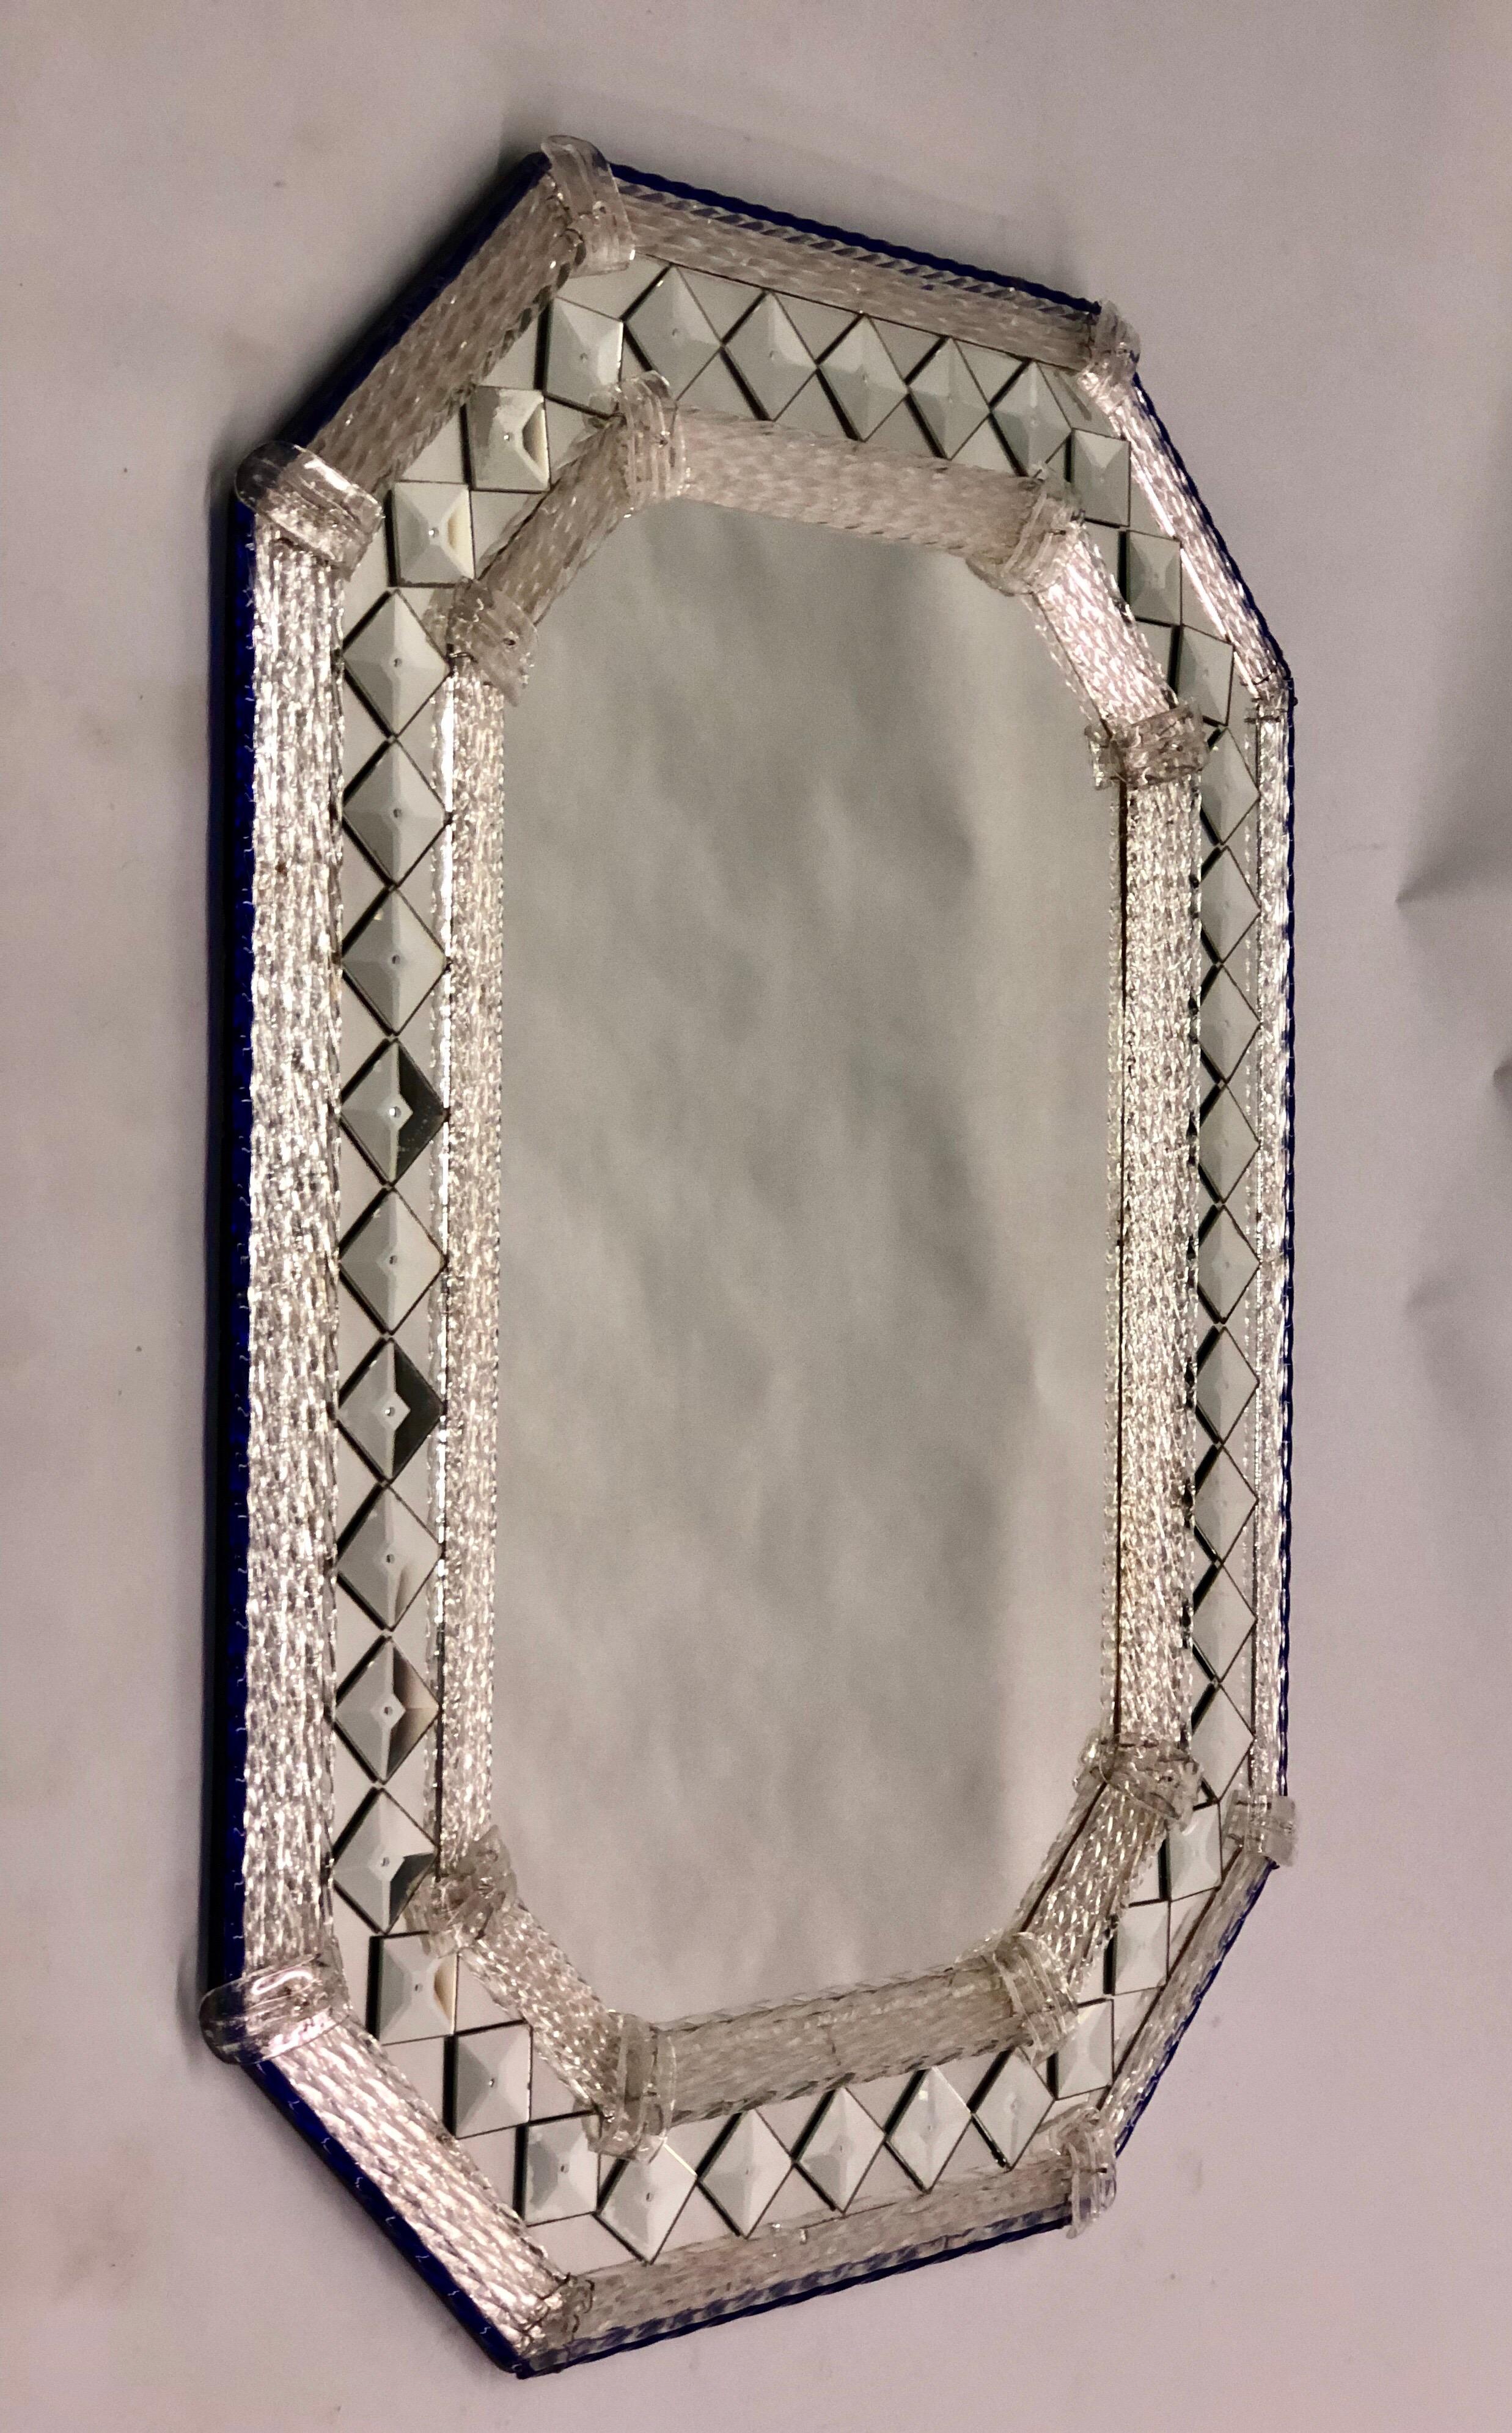 Elegant, timeless, Venetian / Murano Mid-Century Modern neoclassical mirror with a blue ribbon glass outer border and 2 clear ribbon glass internal borders surrounding the central mirror plate. Diamond shaped mirrors are inset between the 2 clear